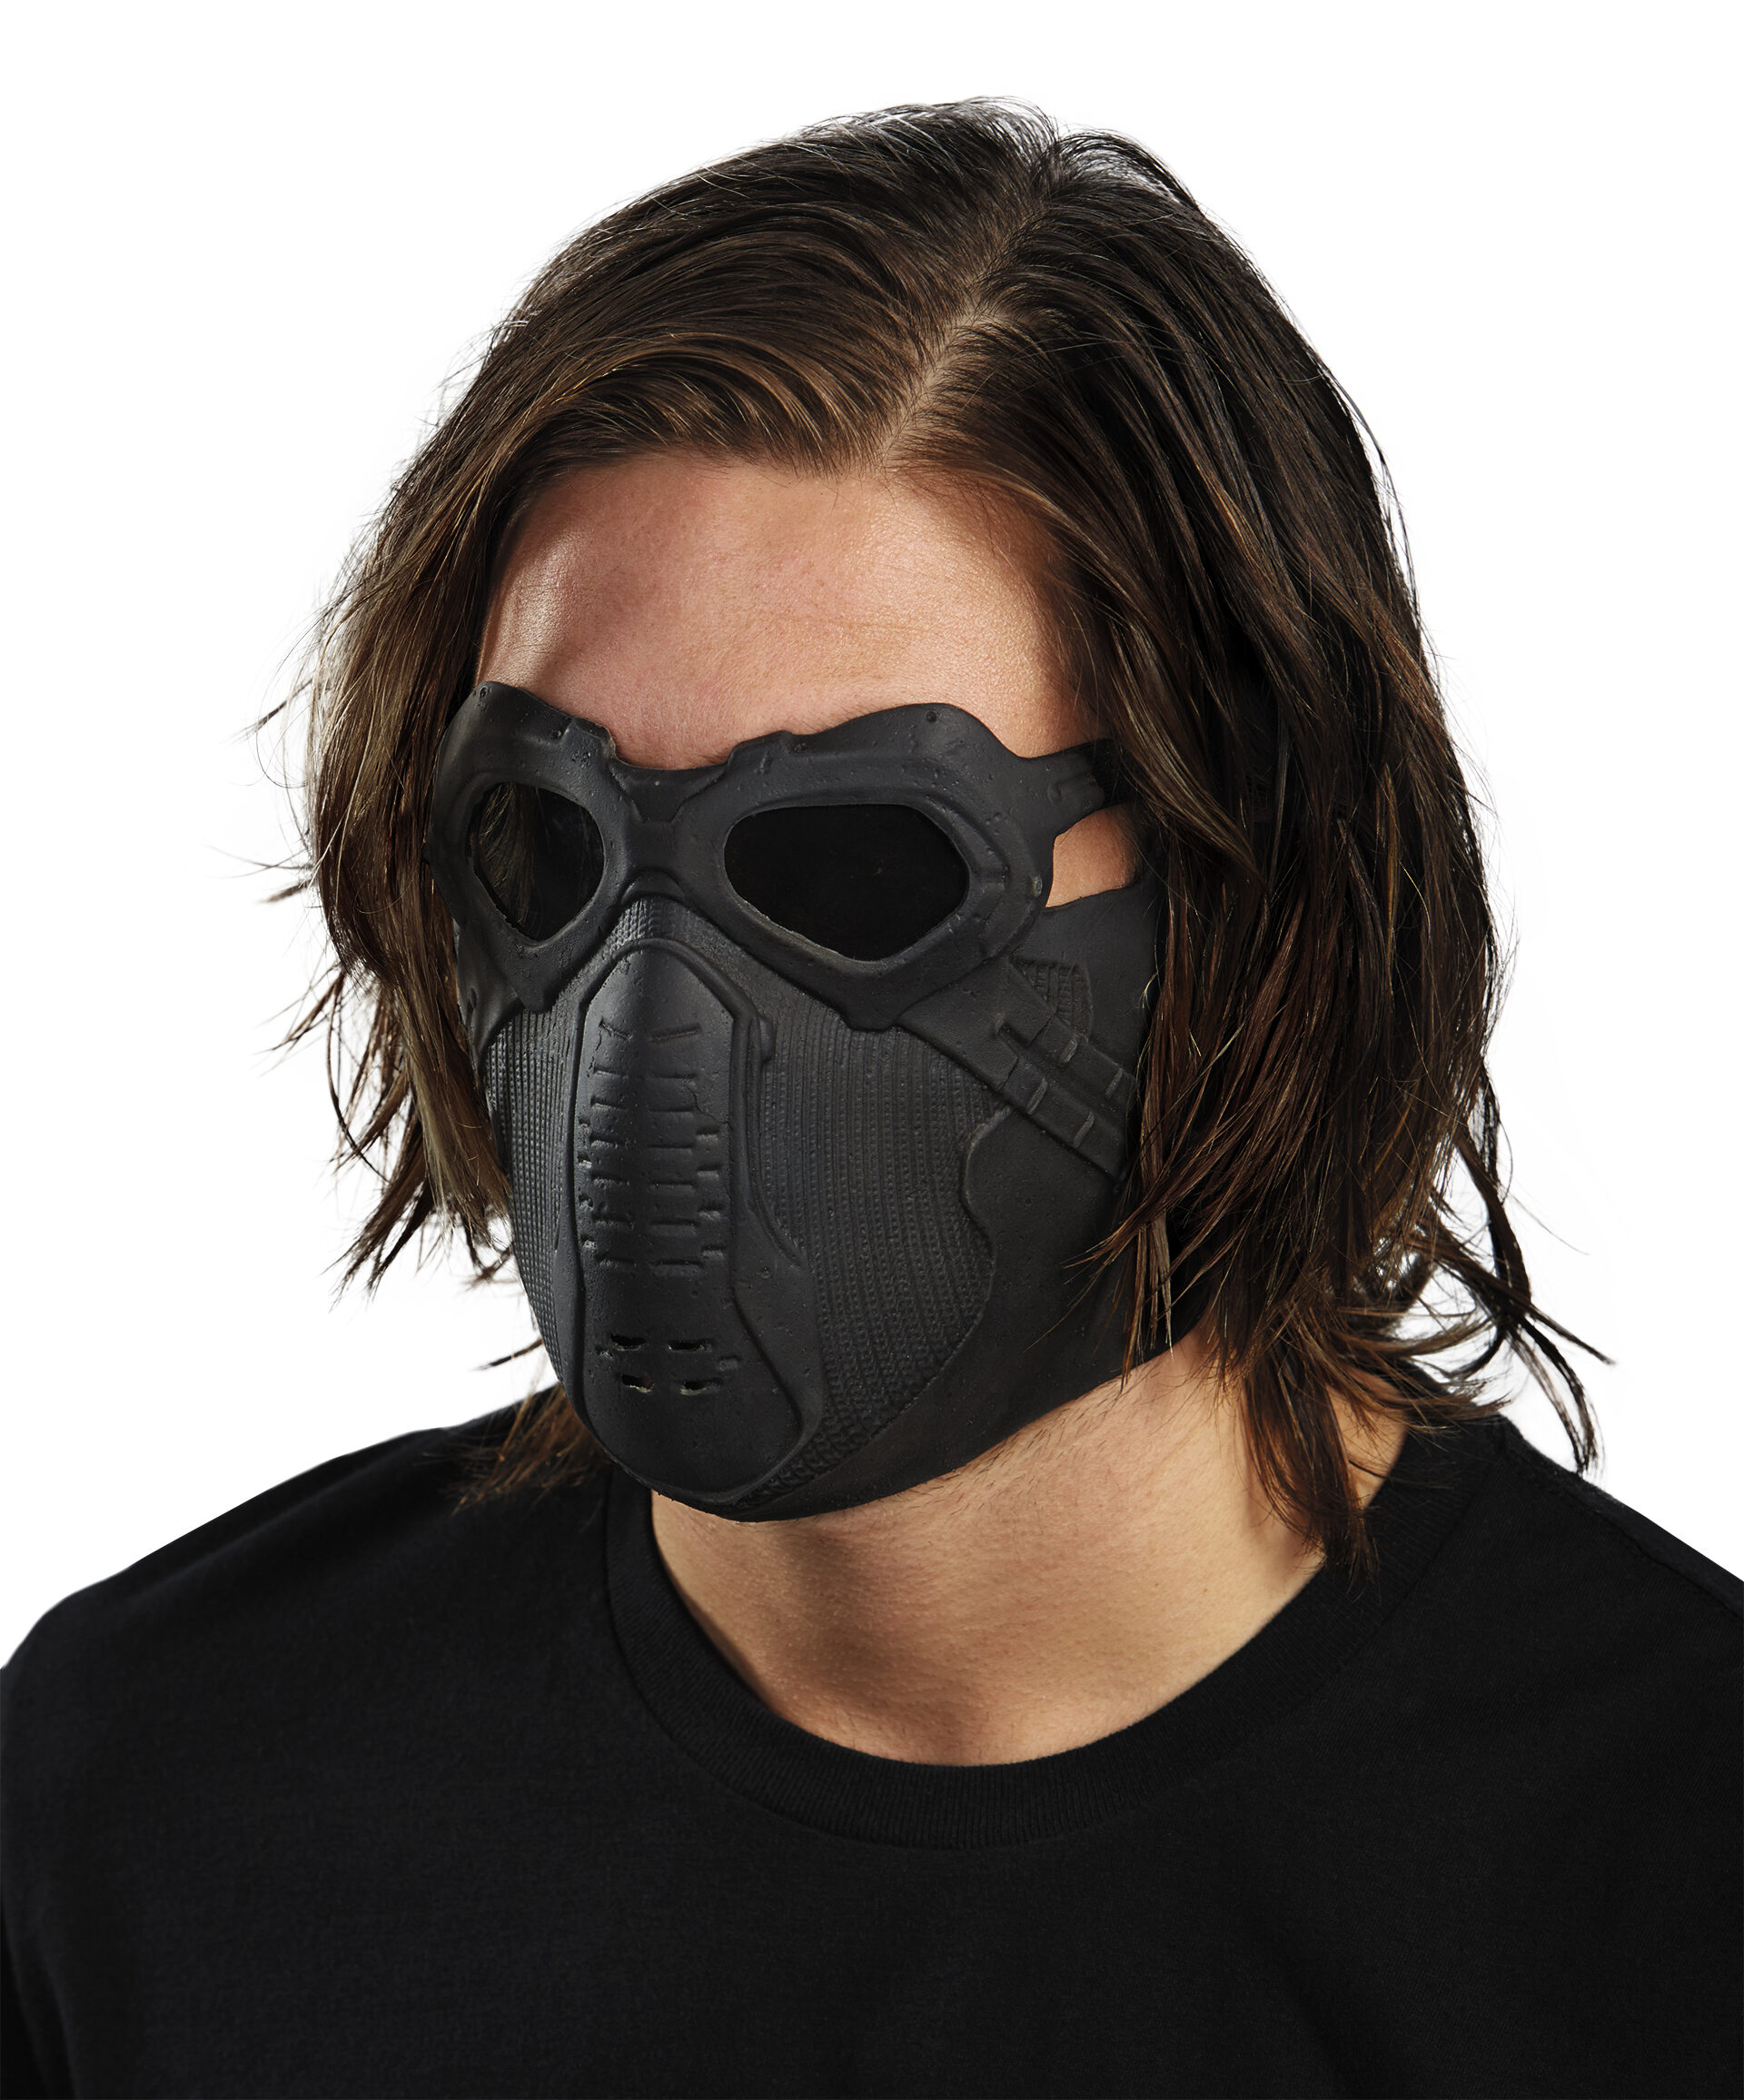 Winter Soldier Mask